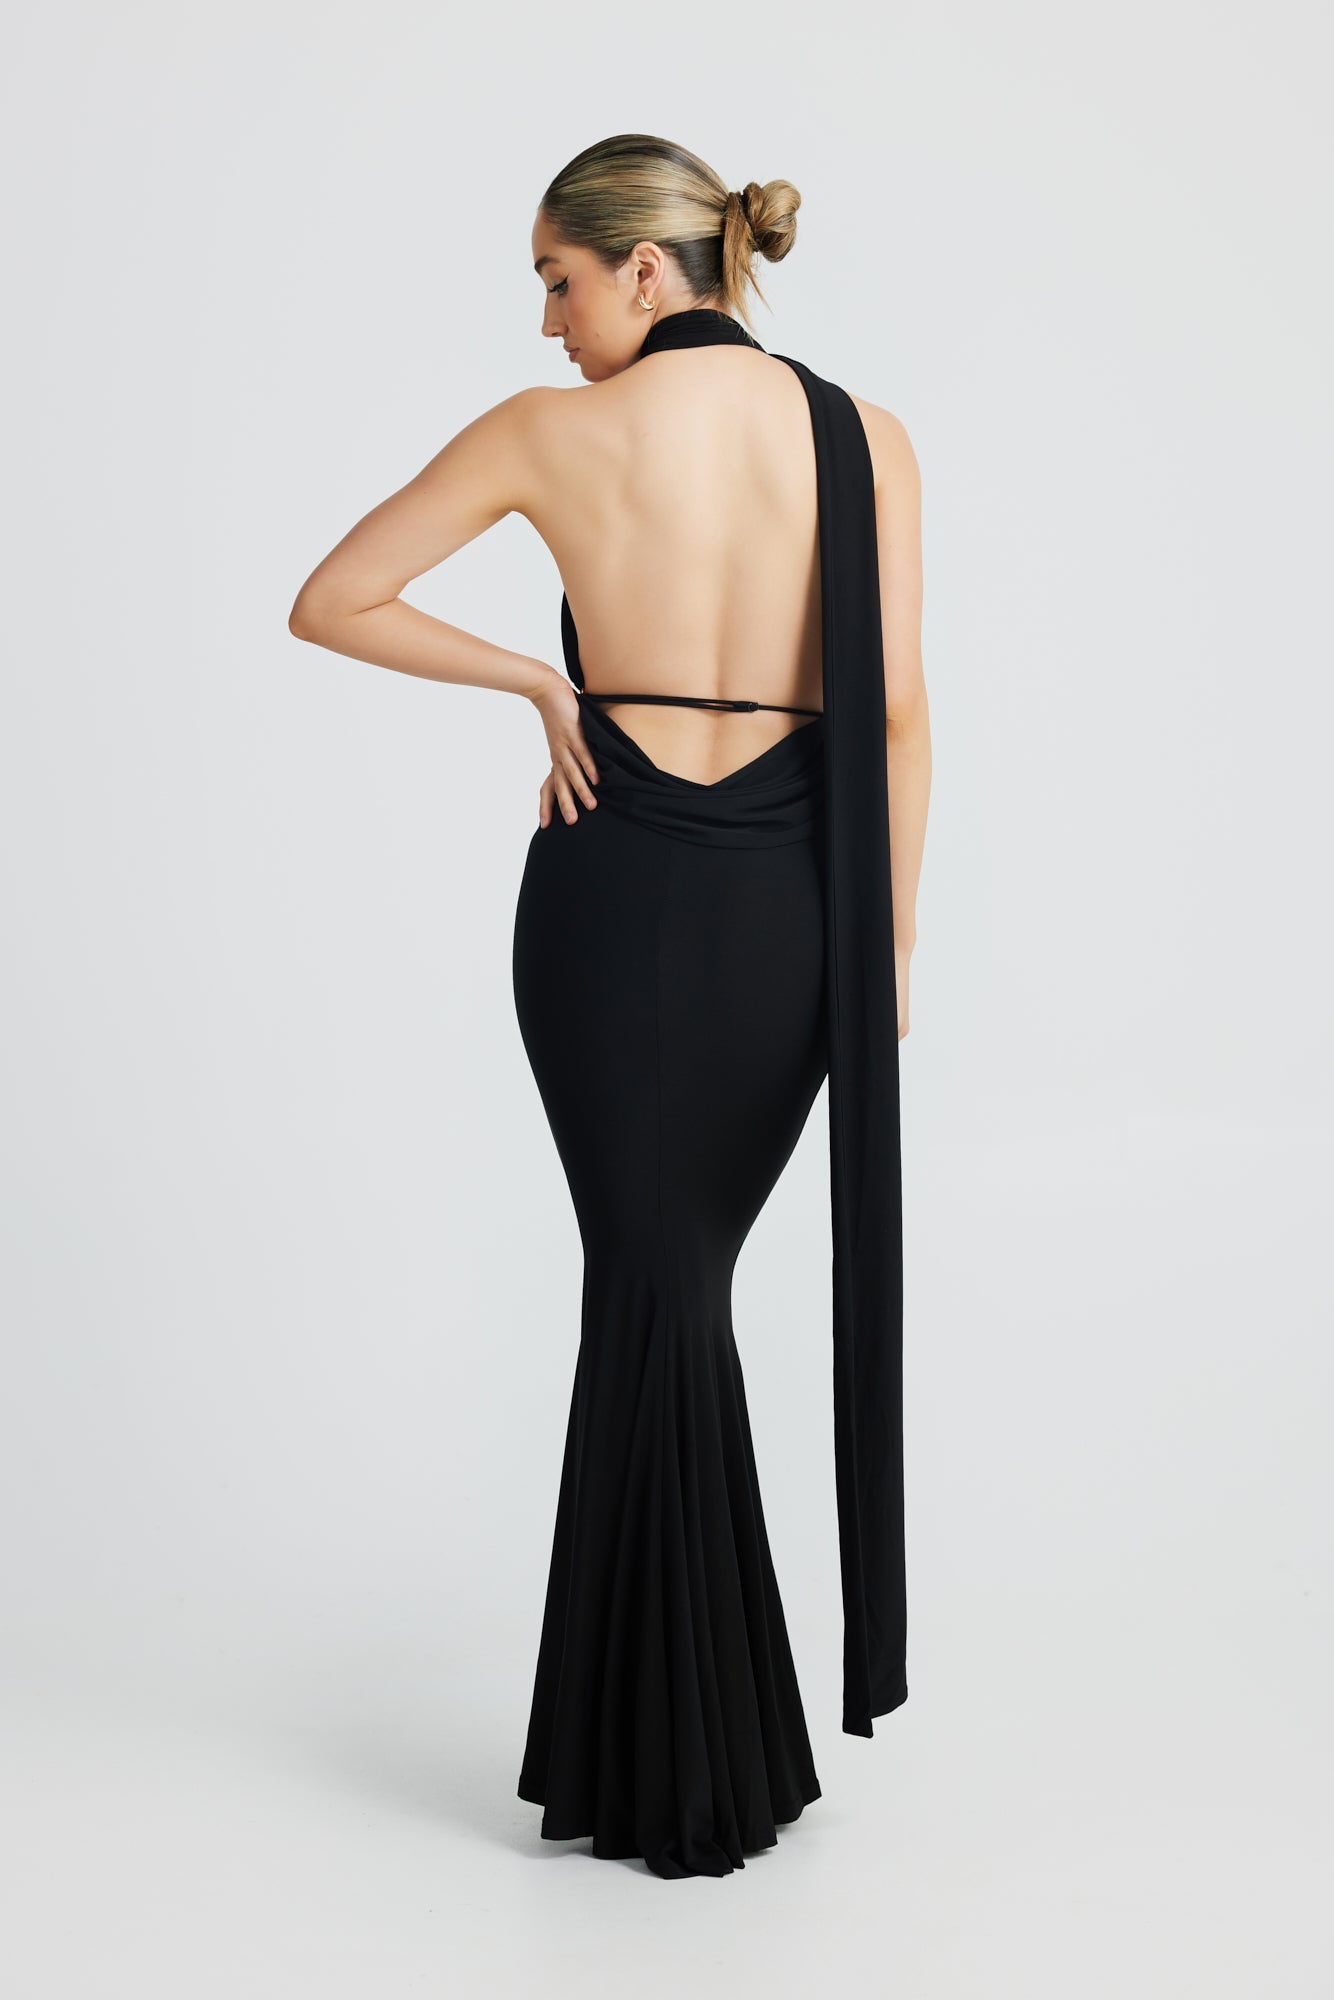 MÉLANI The Label SOFIA Black Asymmetric Backless Form Fitted Dress